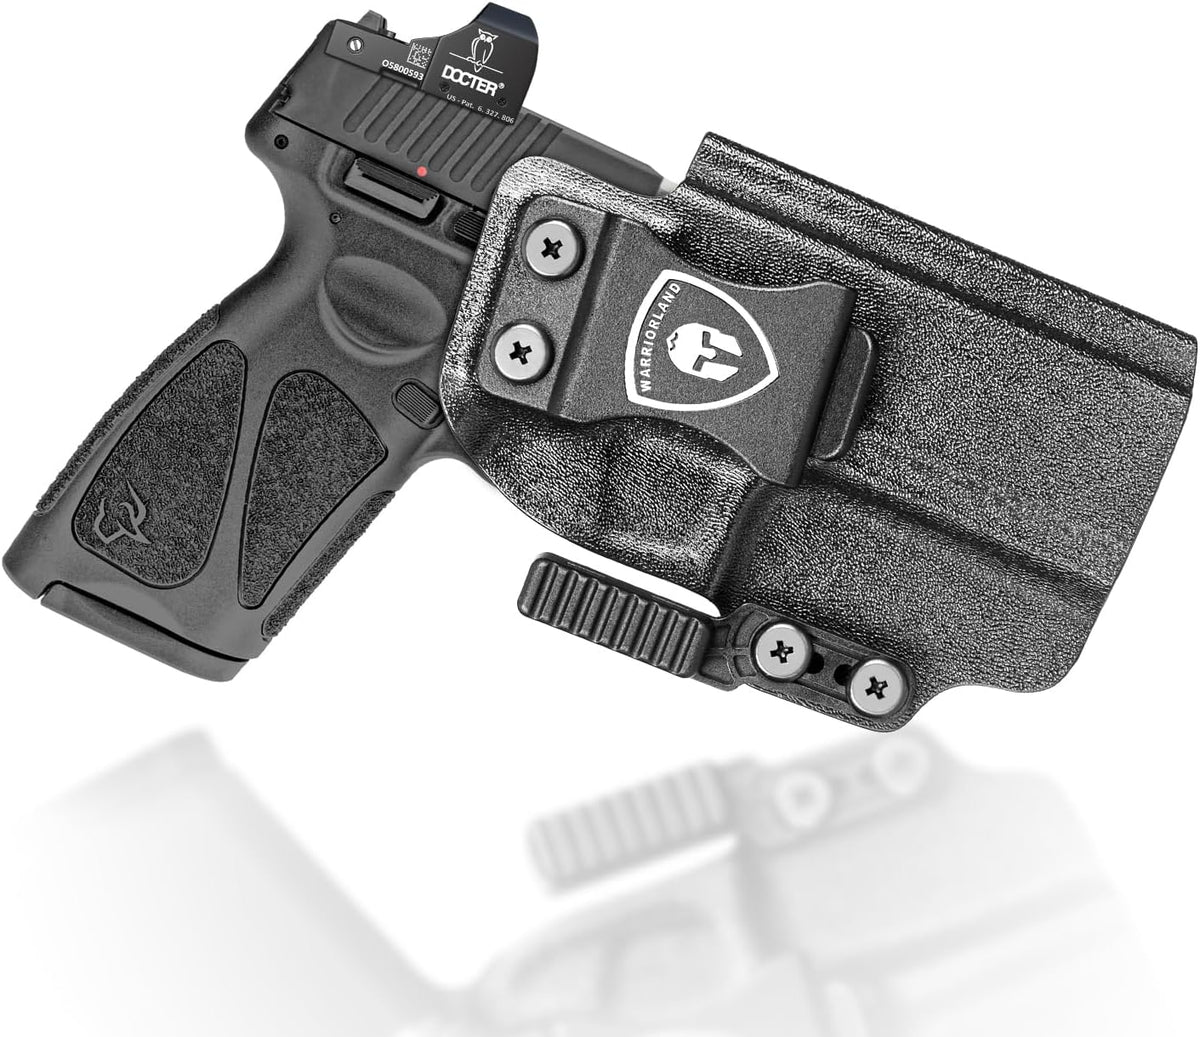 IWB Kydex Holster with Claw Attachment and Optic Cut Fit Taurus G3 Pistol, Inside Waistband Appendix Carry 9mm G3 Holster, Adj. Cant & Retention, Right Hand|WARRIORLAND